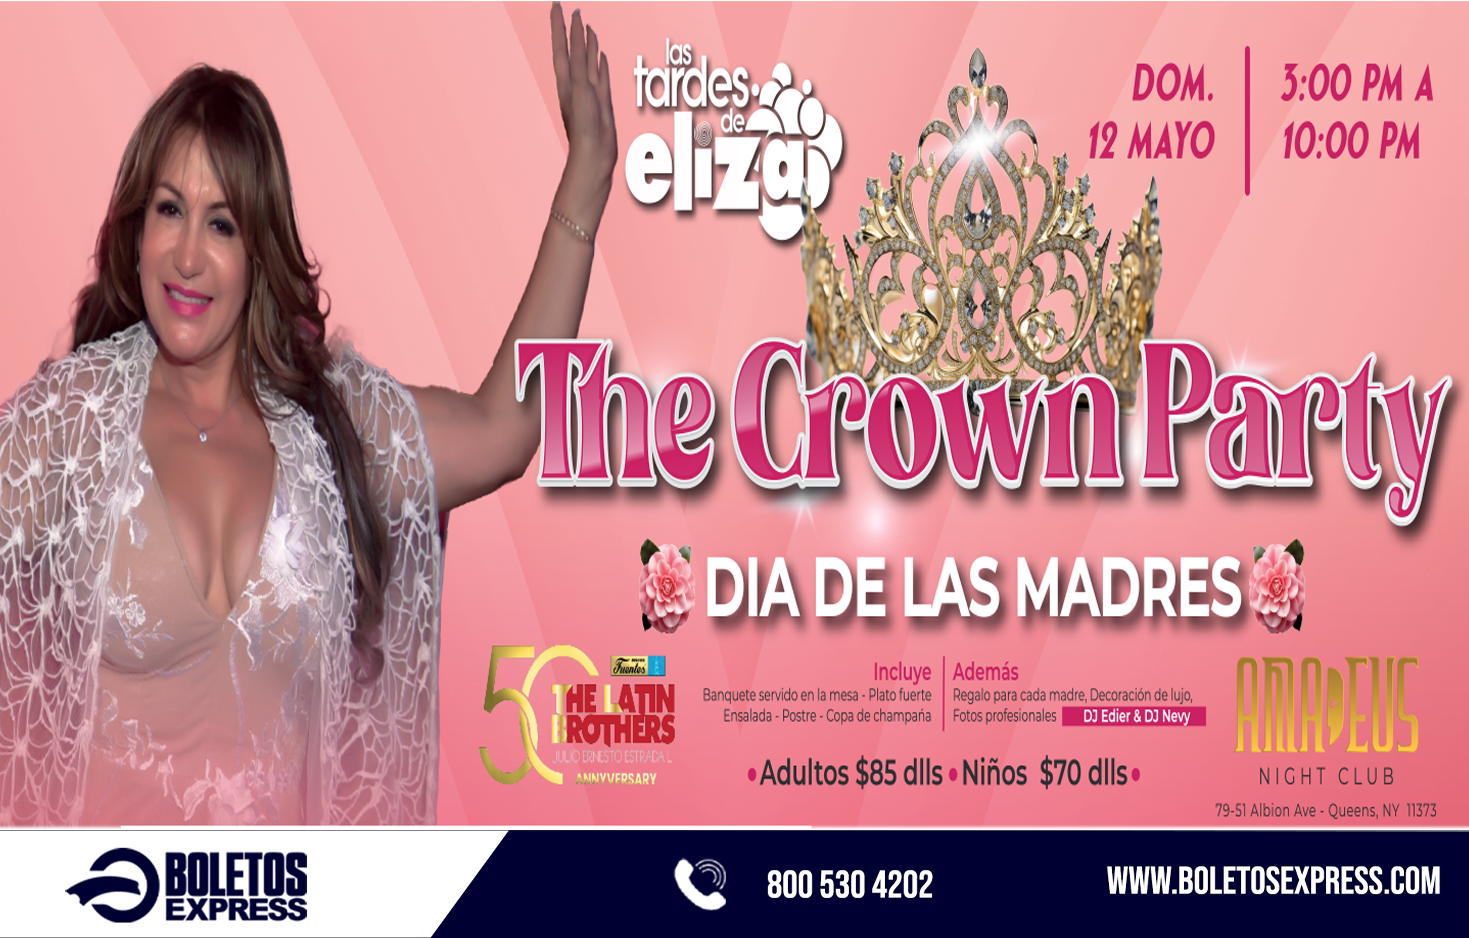 THE CROWN PARTY